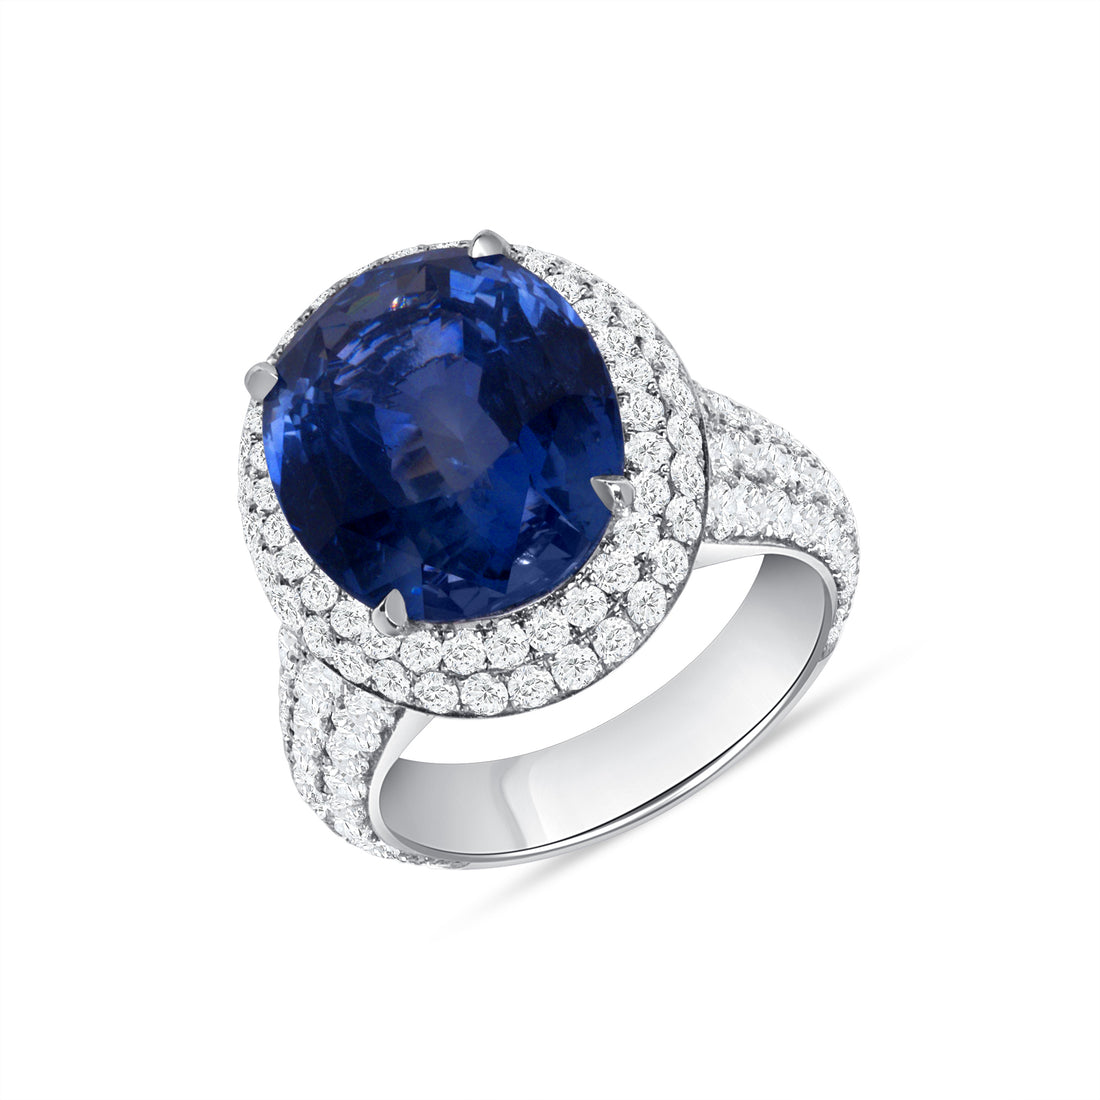 12.35 CT. Oval Cut Blue Sapphire and Round Brilliant Halo Diamond Ring in Platinum